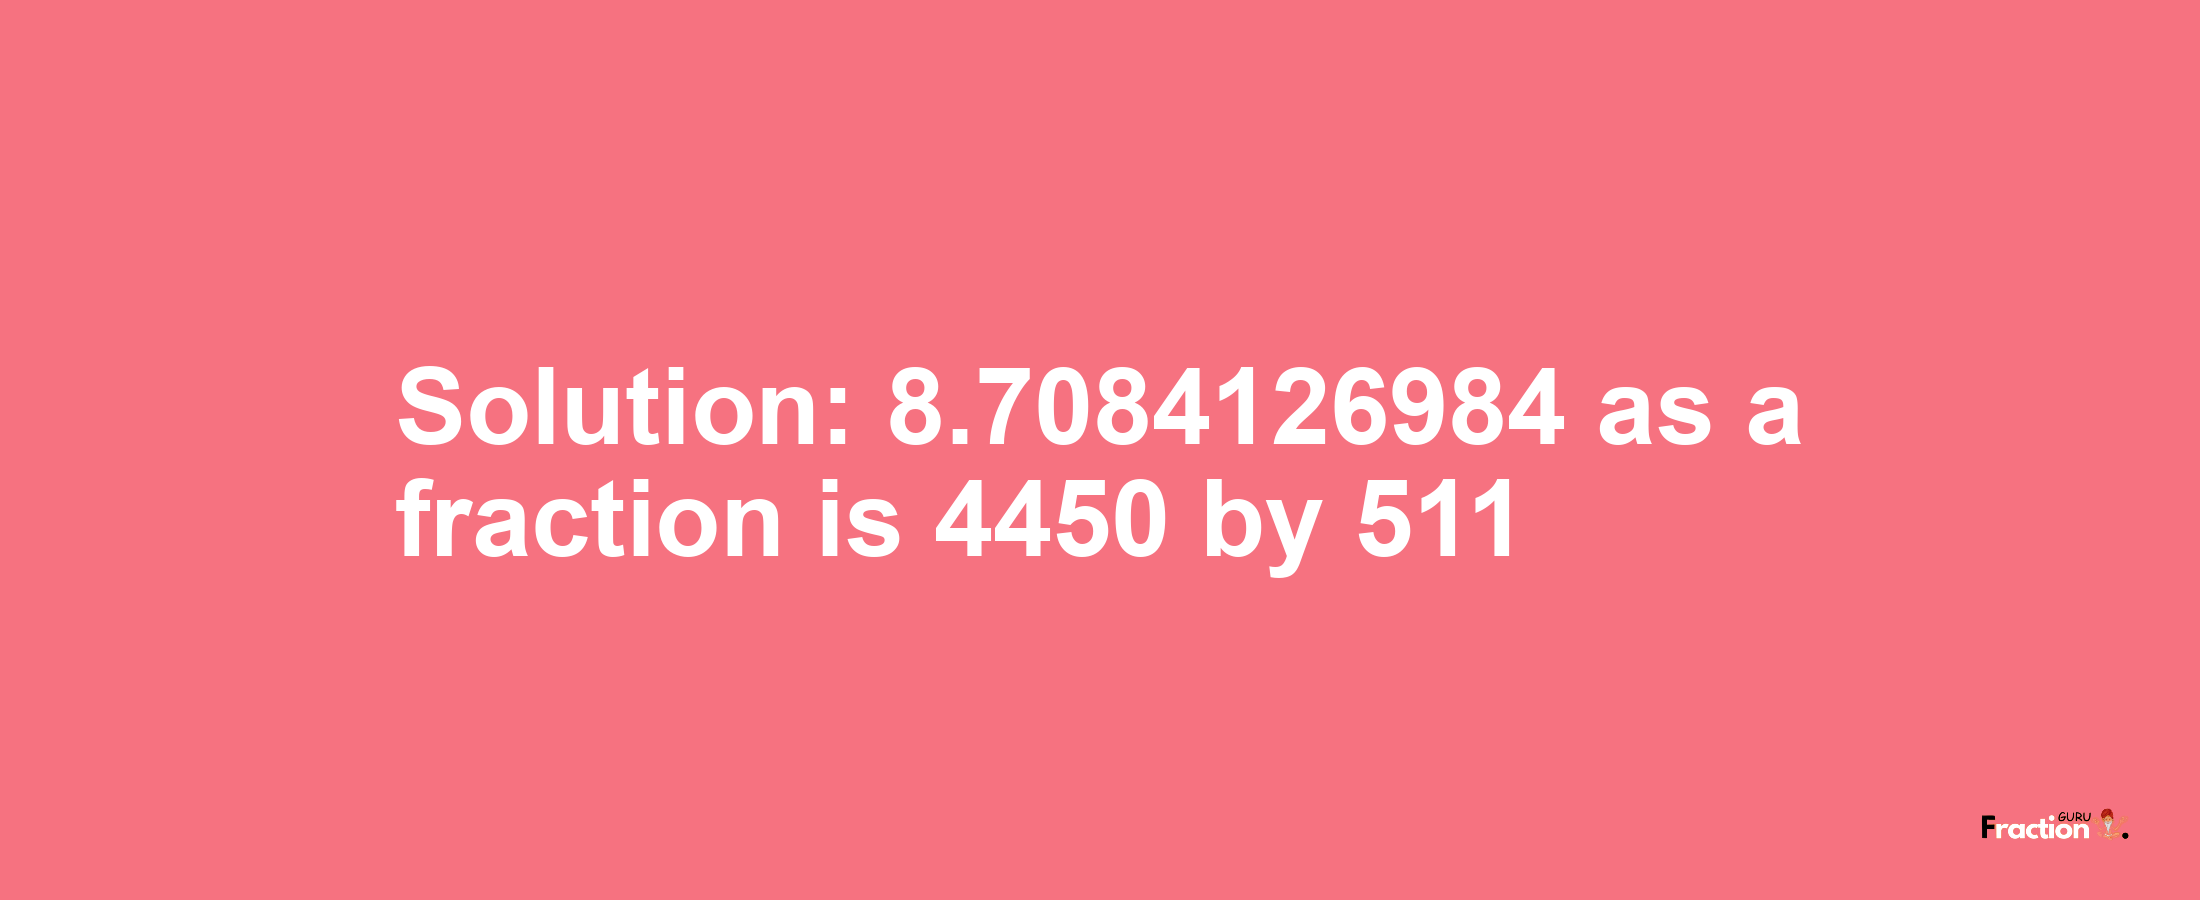 Solution:8.7084126984 as a fraction is 4450/511